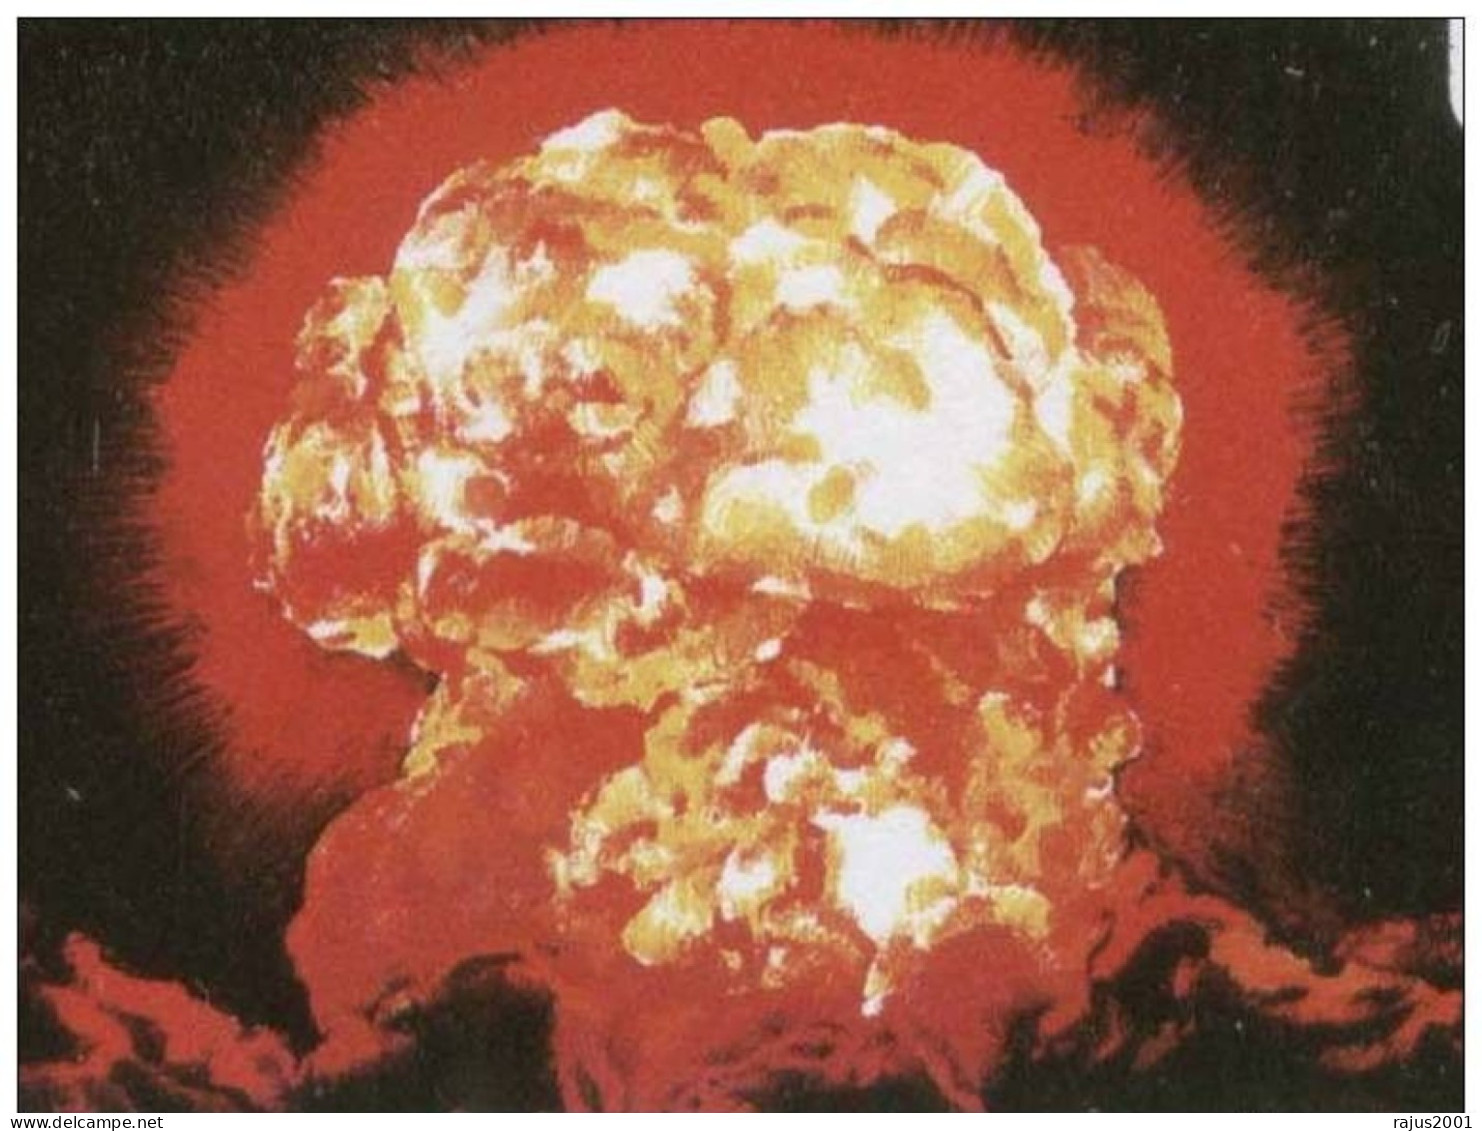 USA & Russia Engage In Arms Race, US Explode First Hydrogen Bomb At Enewetak Atoll, Atomic Bomb, Marshall Island FDC - Atom